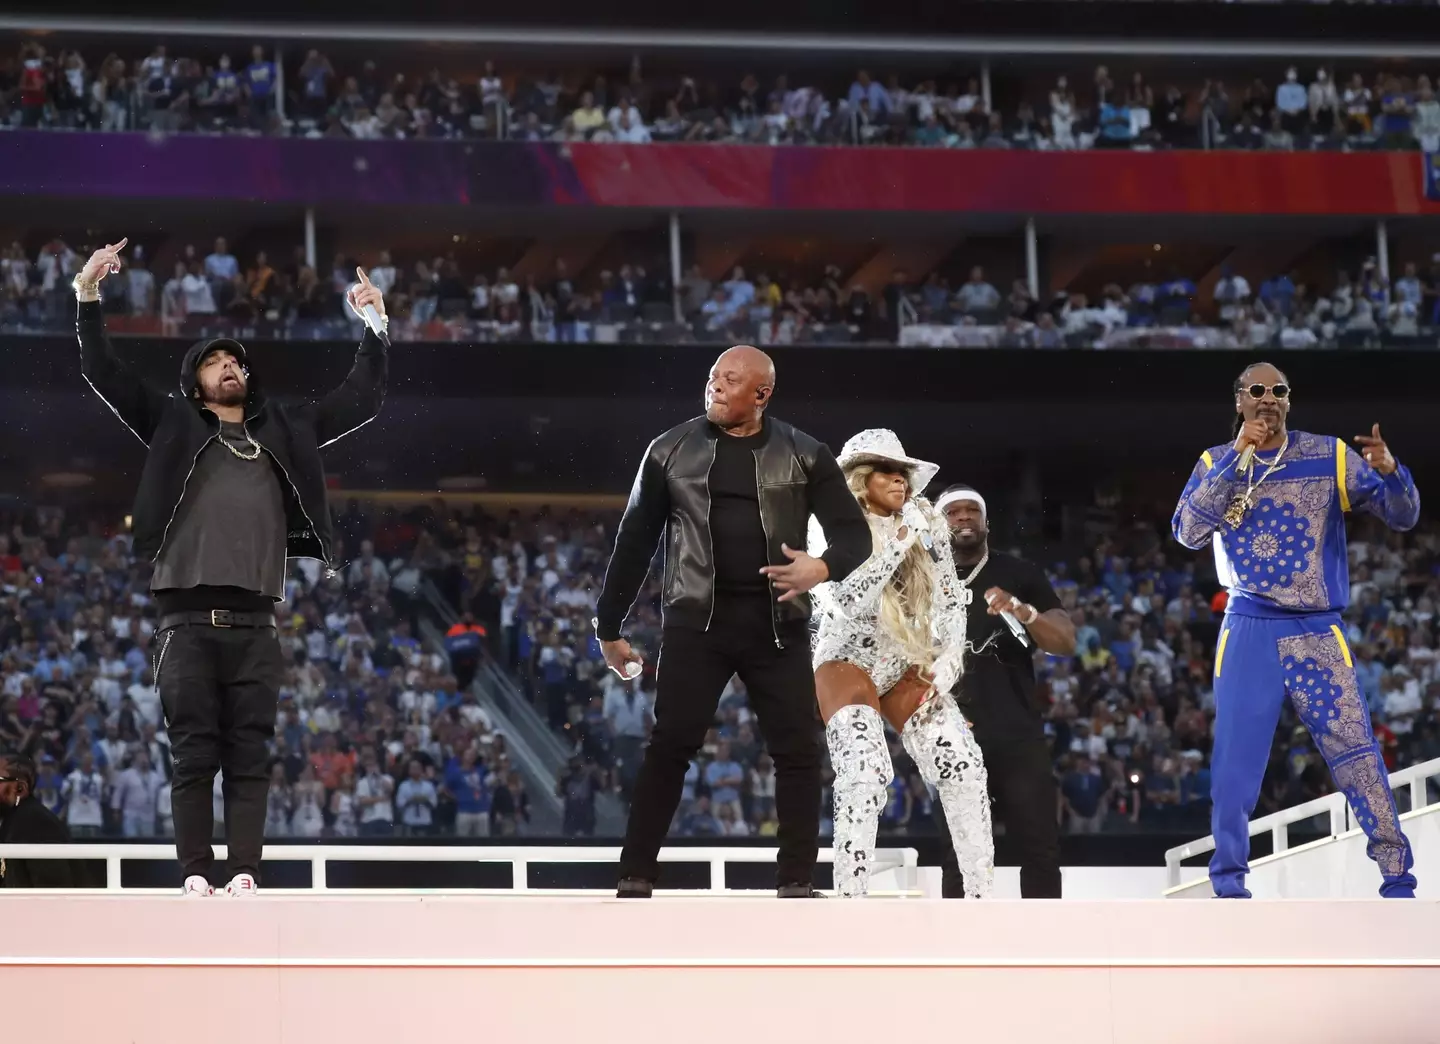 The trio performing together at the Super Bowl halftime show.